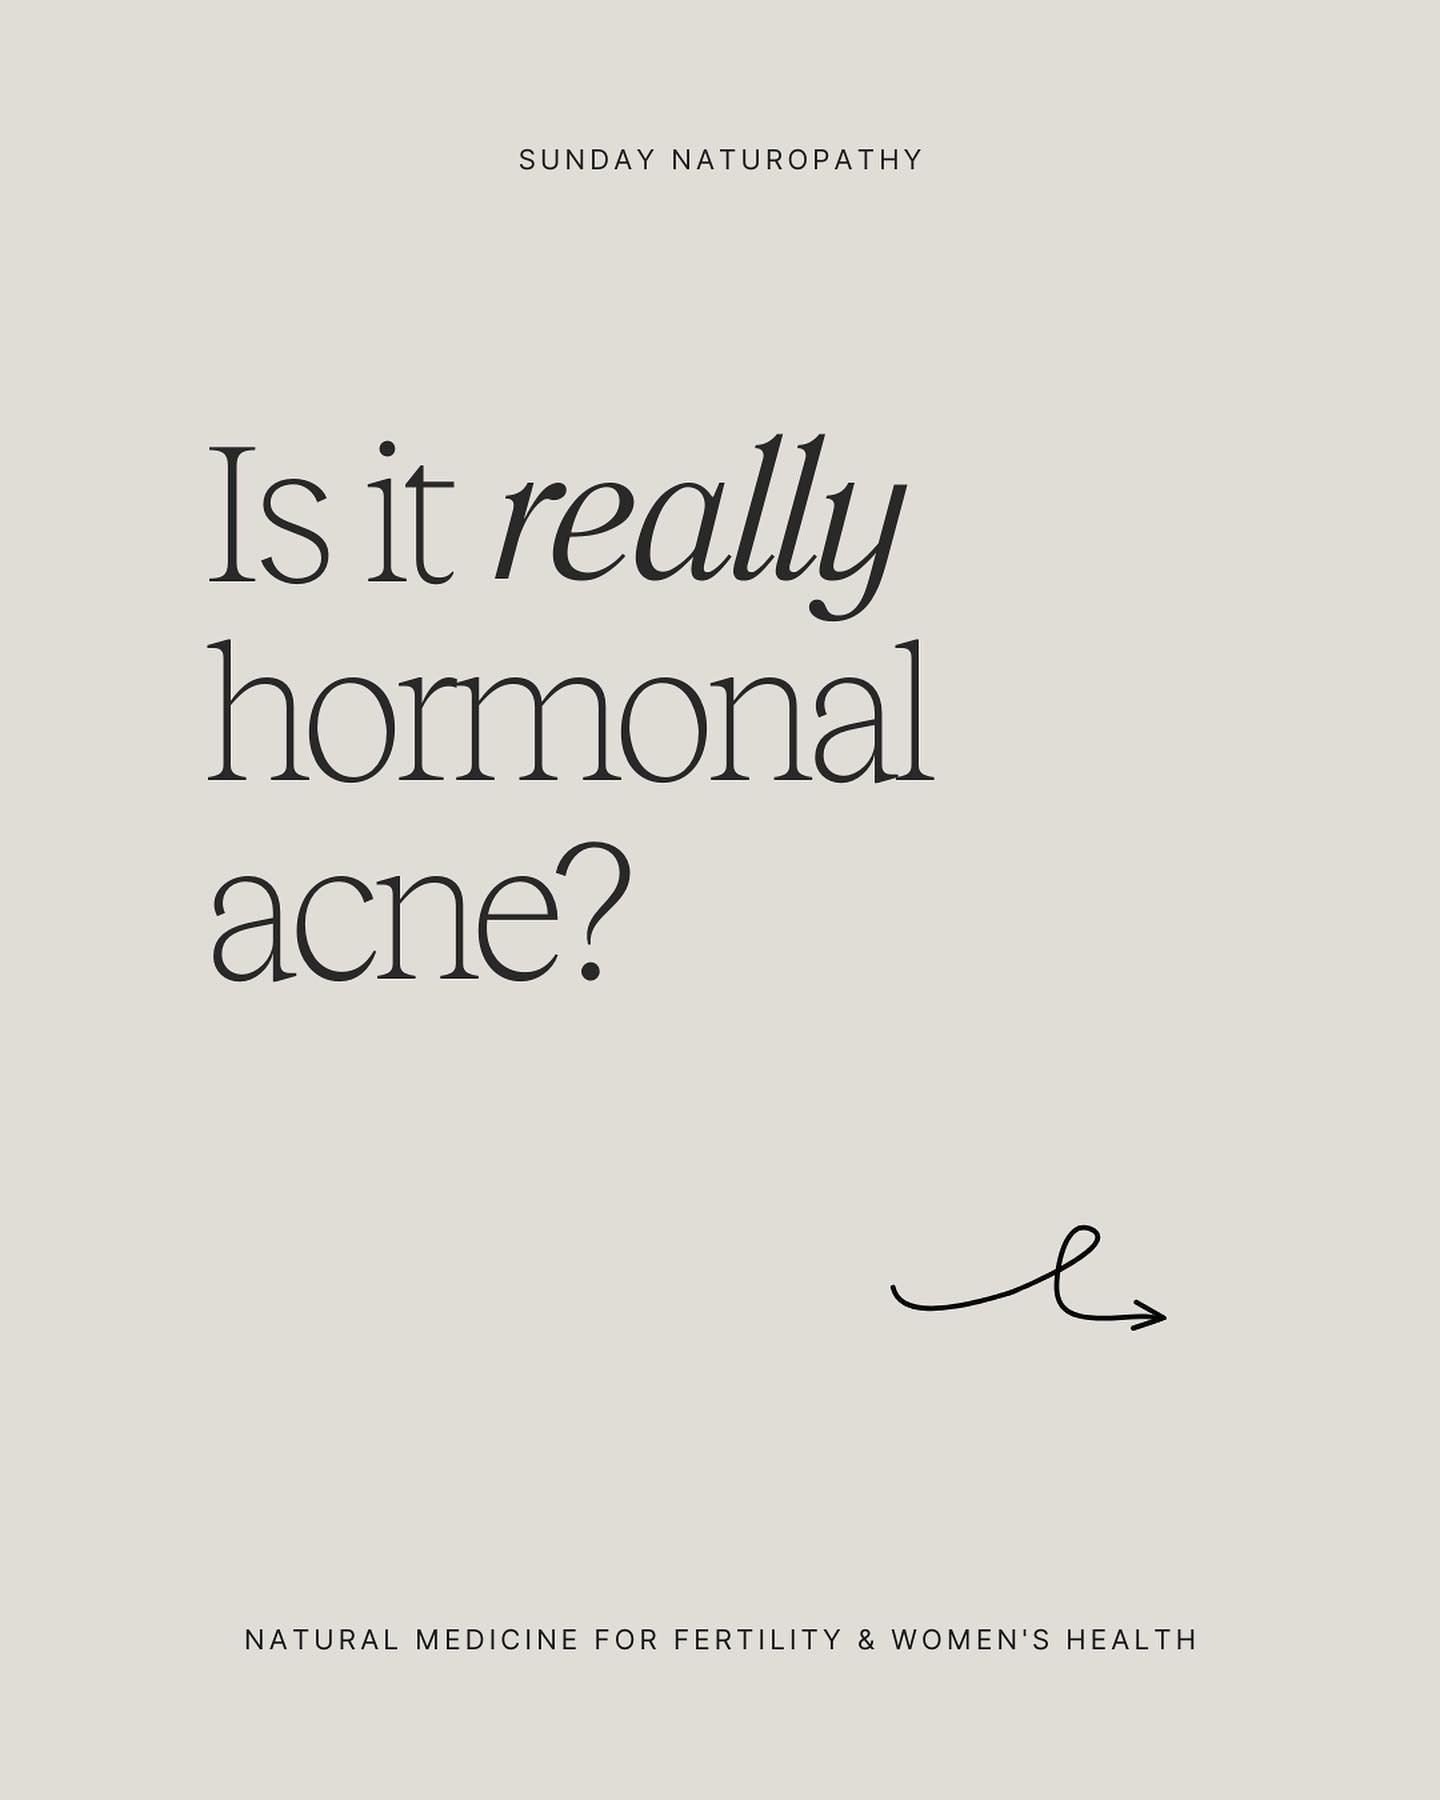 Spoiler alert: acne isn&rsquo;t always caused by hormones. The gut (in more ways than I could possibly hope to explain in this caption) is often the root cause of skin woes. 

Look for these clues:

&mdash; You&rsquo;ve tried a contraceptive pill, an